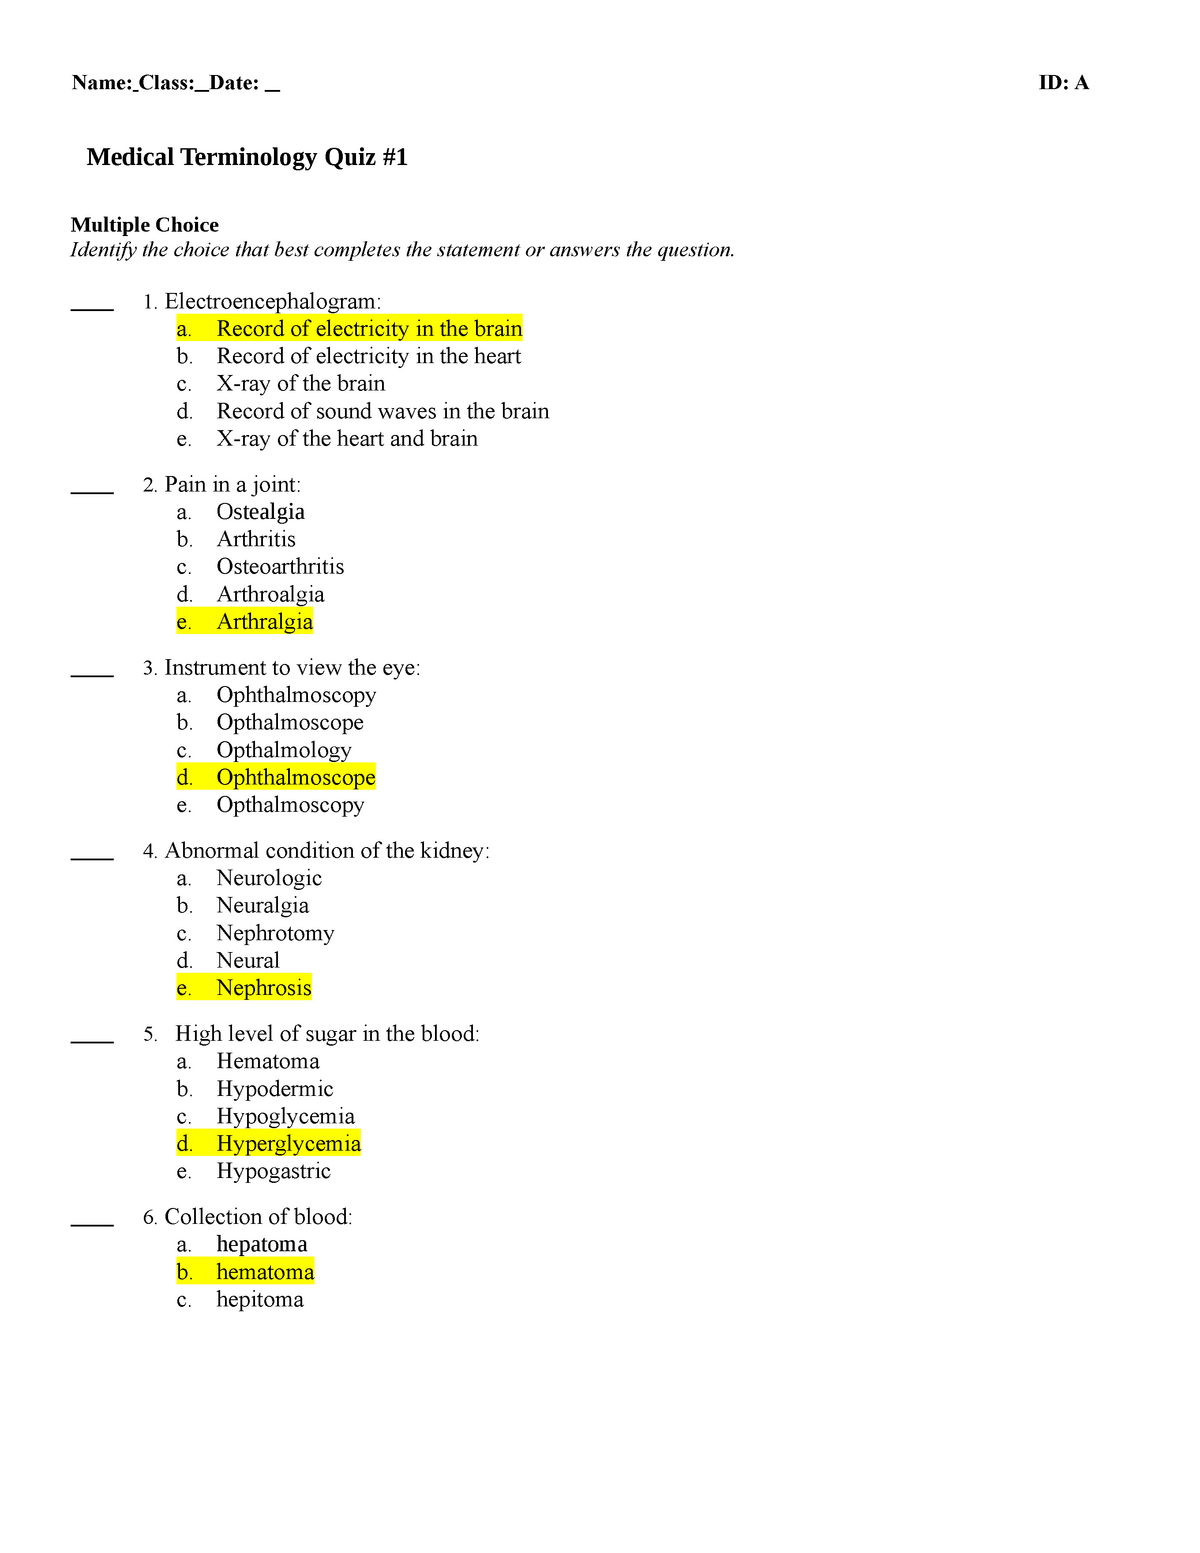 medical terminology assignment 1.3 answers